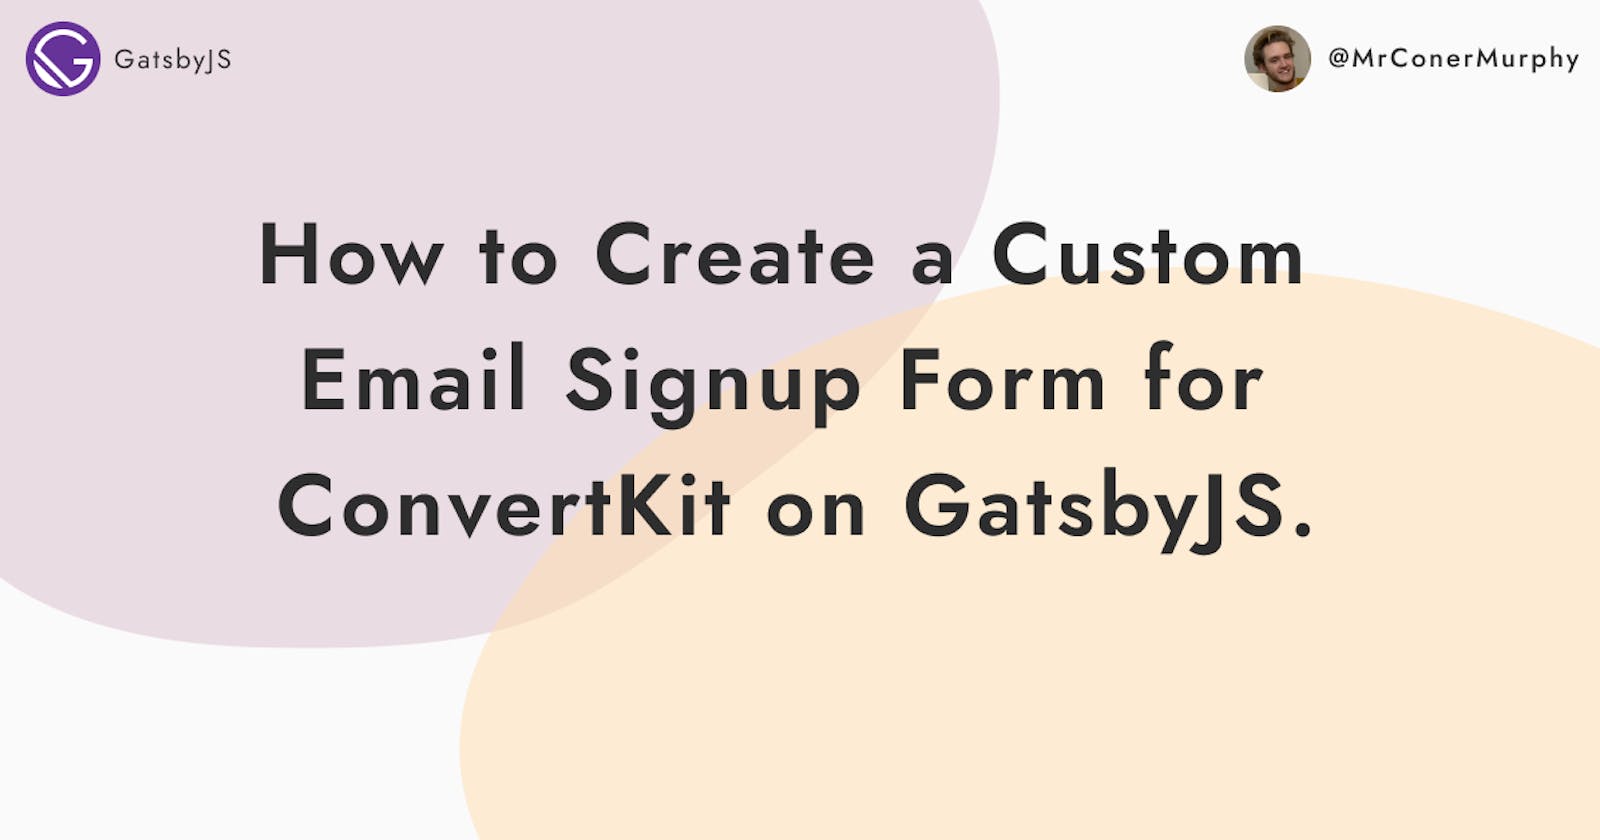 How to Create a Custom Email Signup Form for ConvertKit on GatsbyJS.